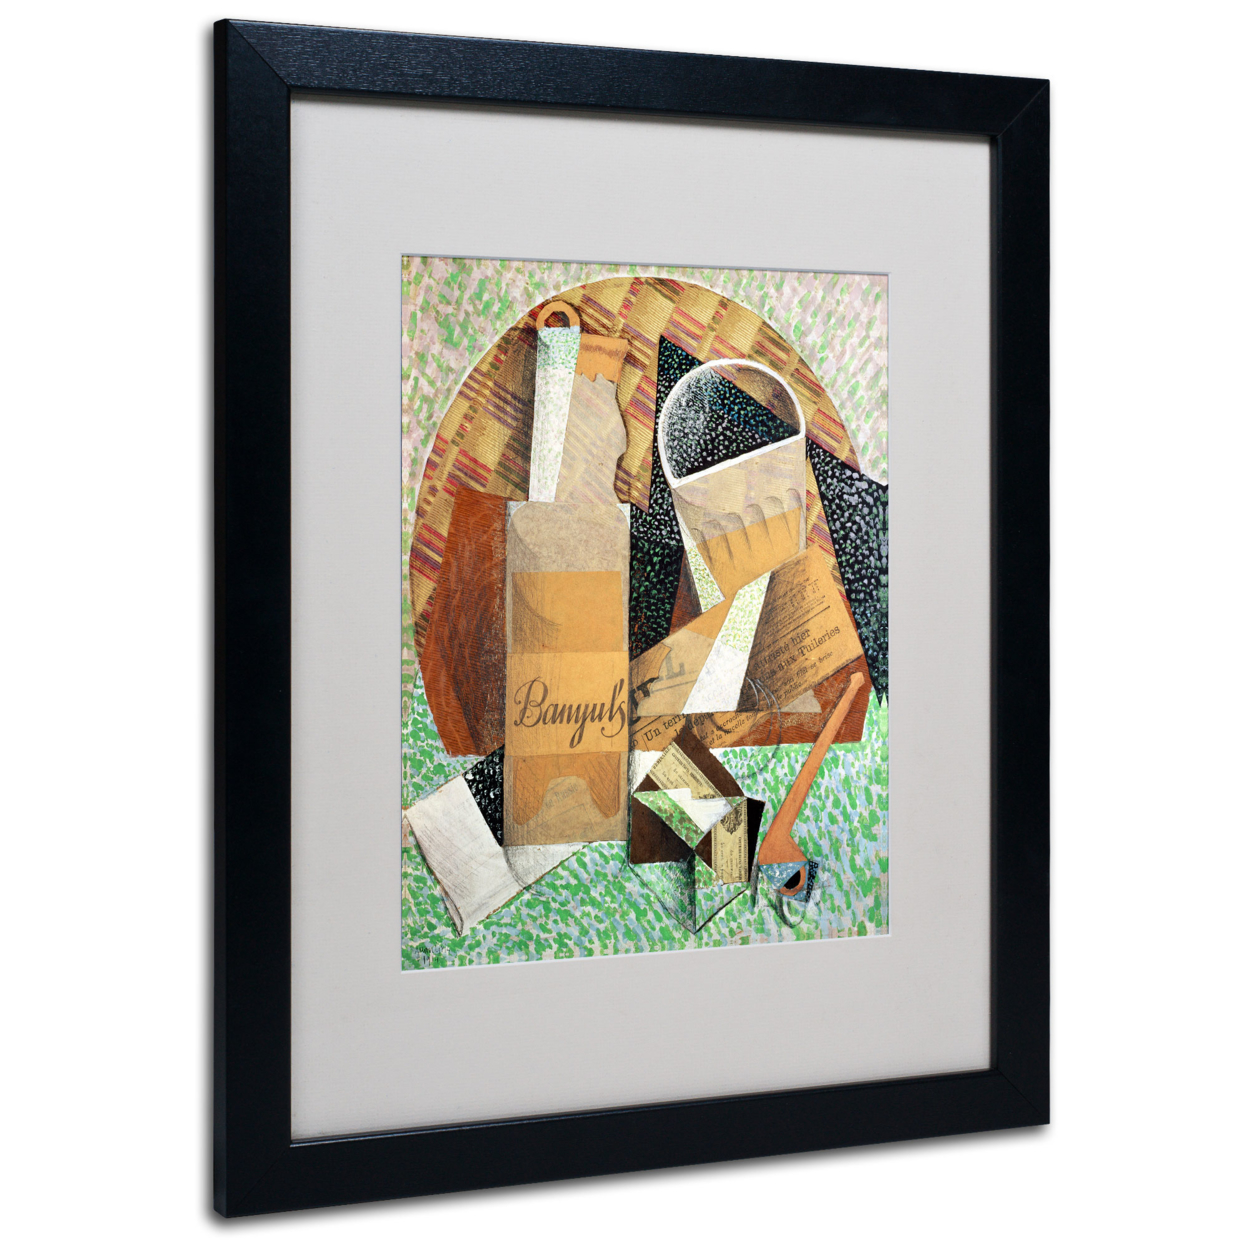 Juan Gris 'The Bottle Of Banyuls 1914' Black Wooden Framed Art 18 X 22 Inches